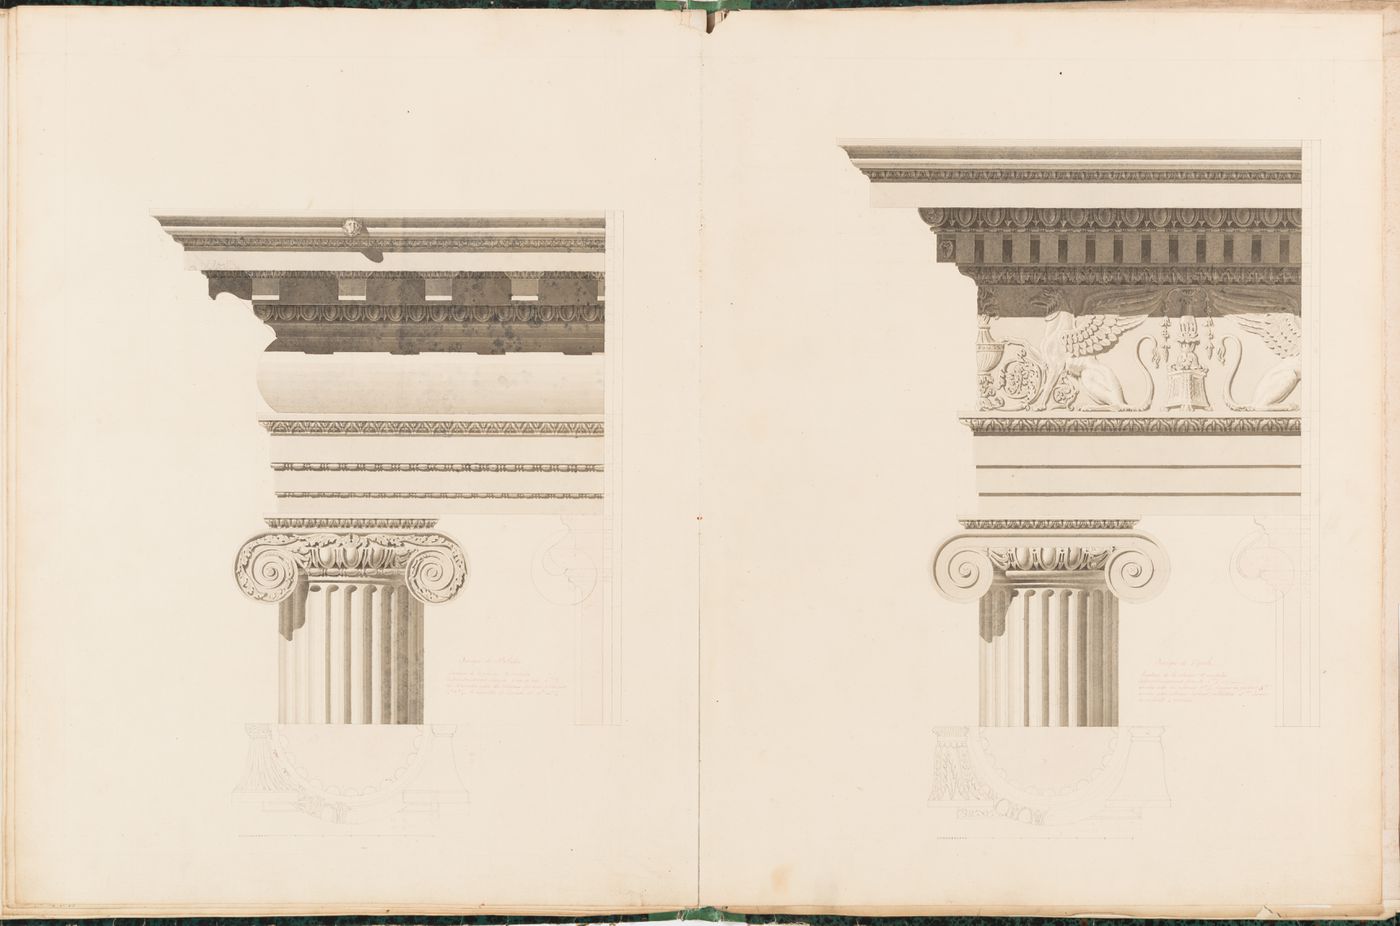 Elevations of two Ionic shafts, capitals, and entablatures after Palladio and Vignola, with plan and section details of the shafts and capitals